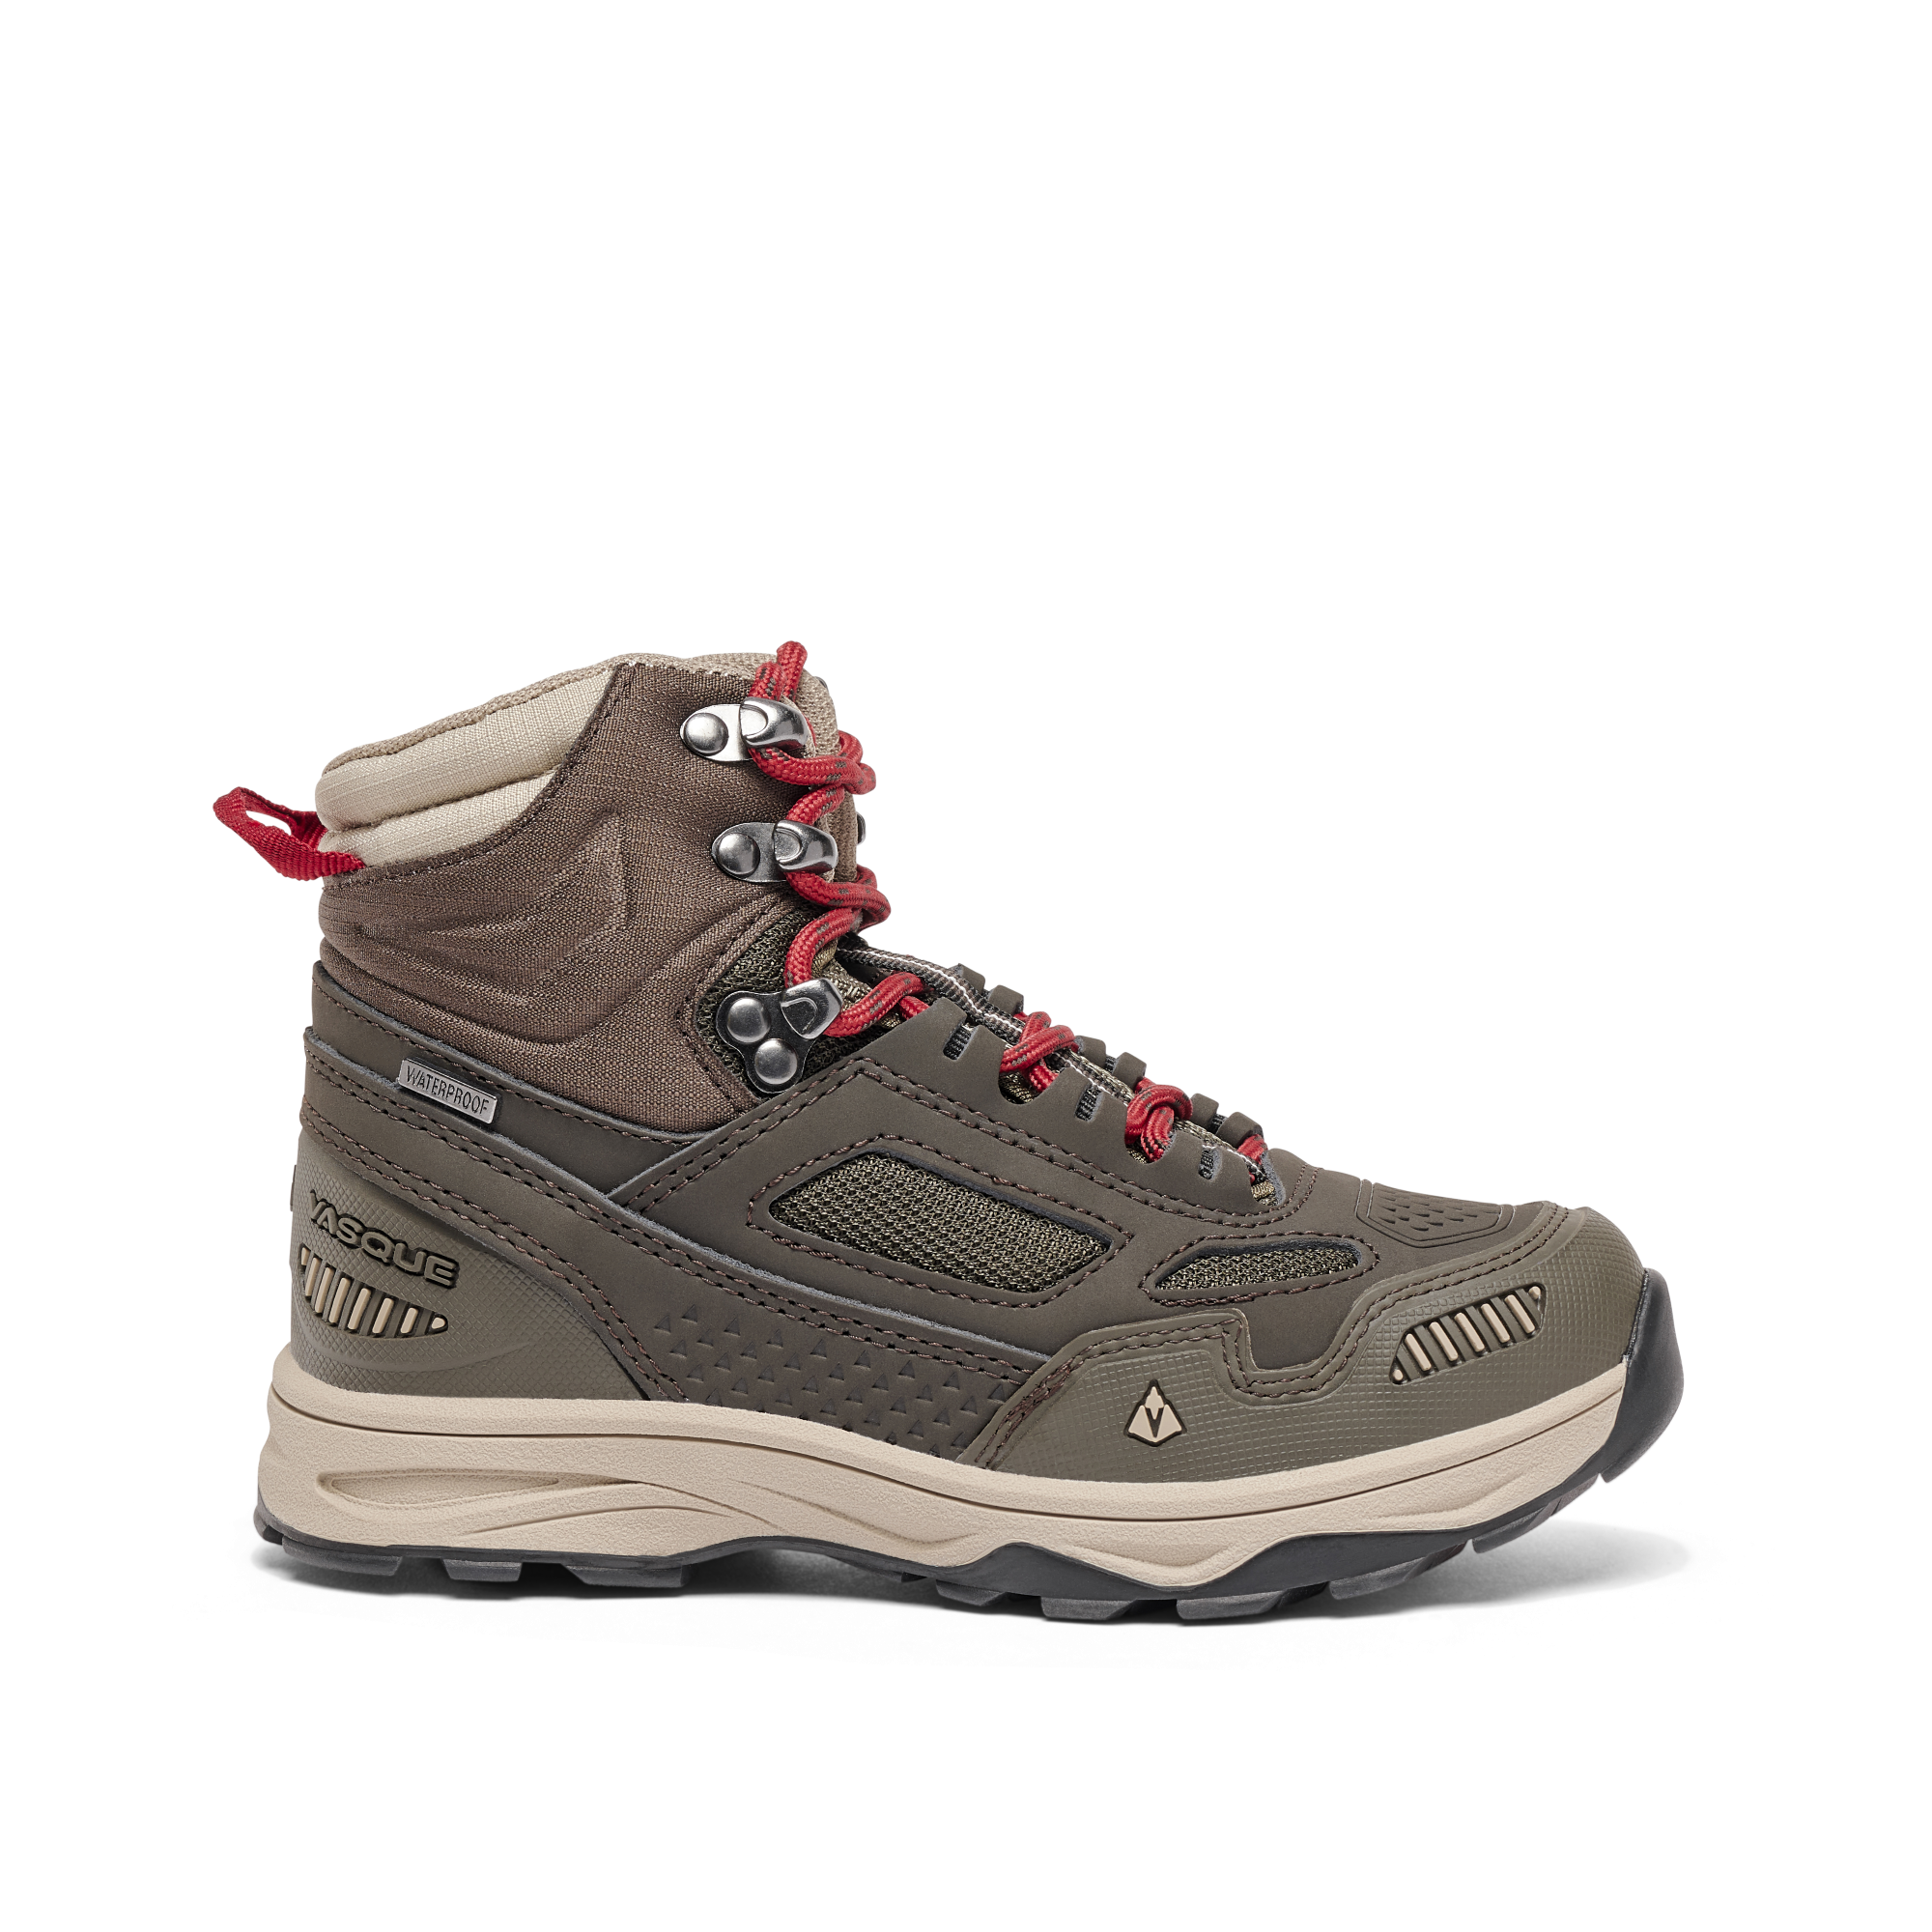 Vasque Breeze AT UltraDry Waterproof Hiking Boots for Kids - Olive - 6 Kids